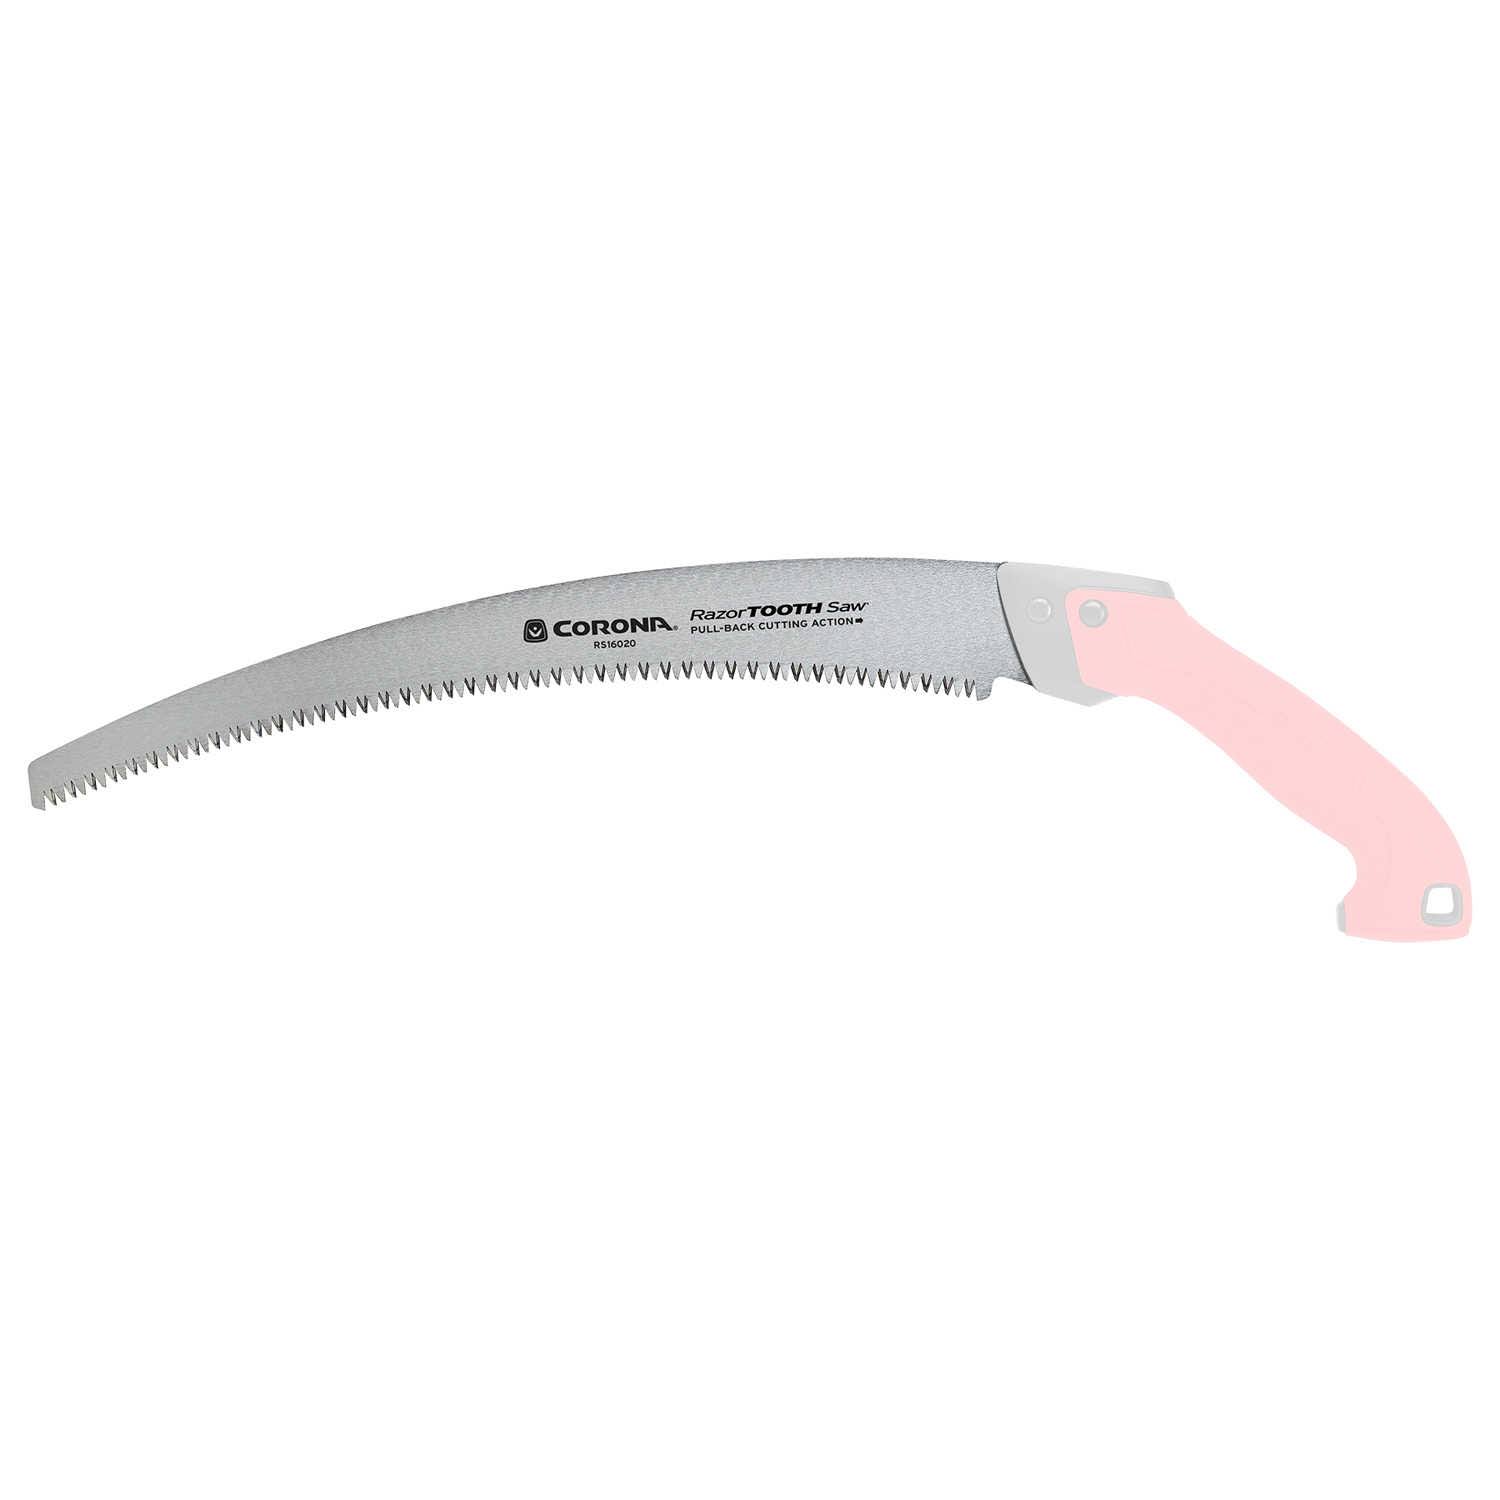 Replacement Blade for Corona RazorTOOTH Model RS 16020 Pruning Saw